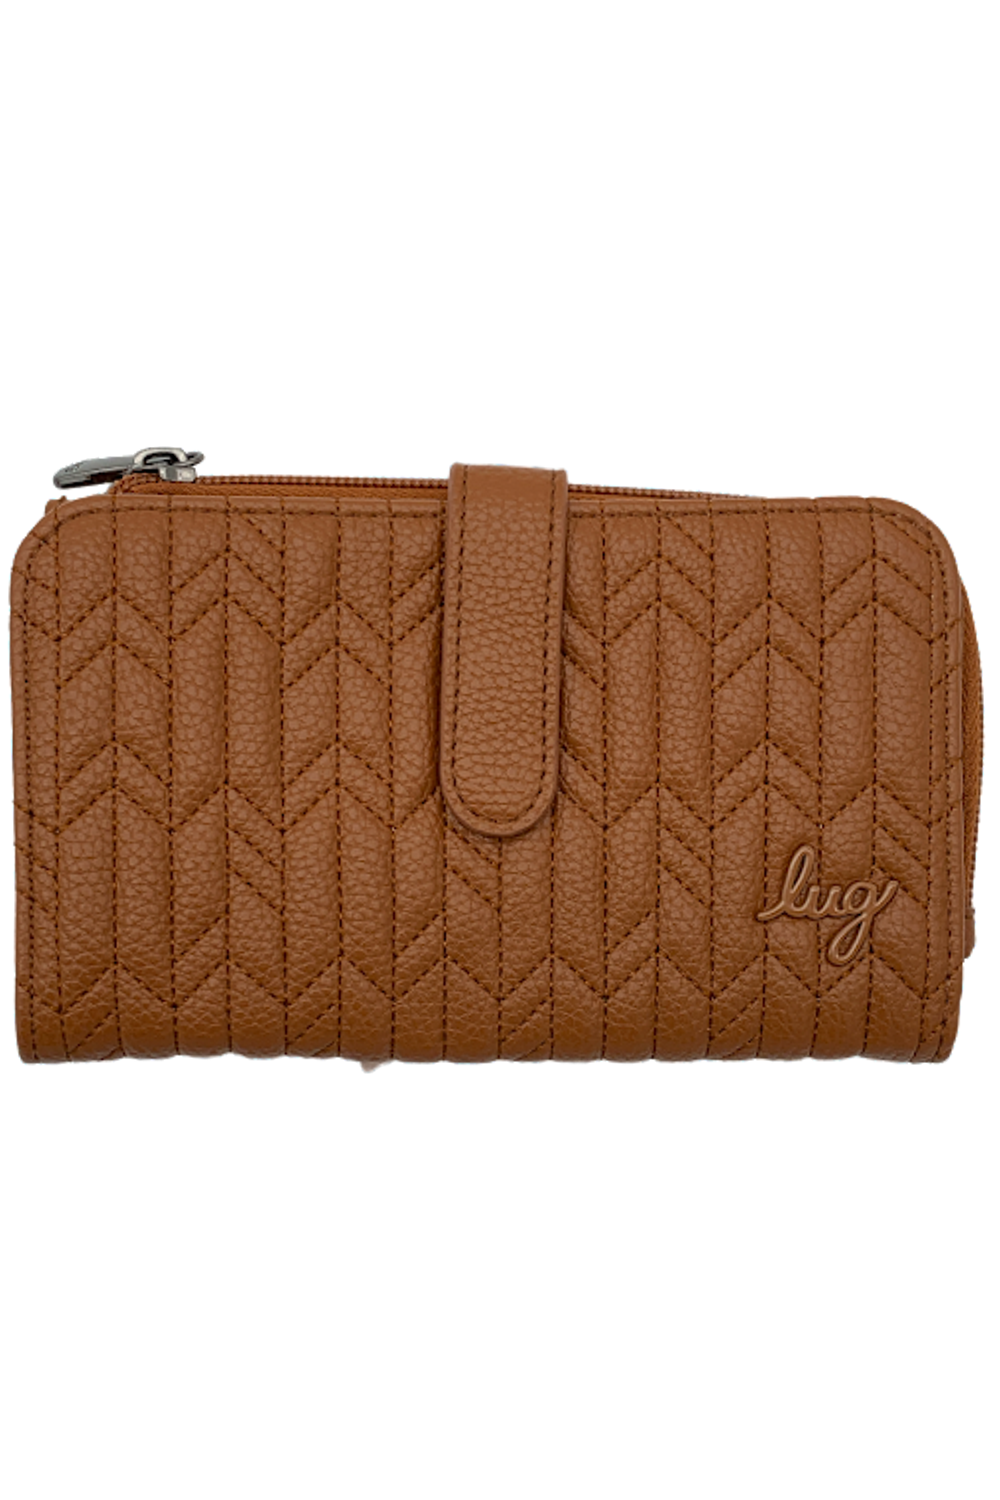 Lug Classic VL Quilted Wallet Tram Copper Brown